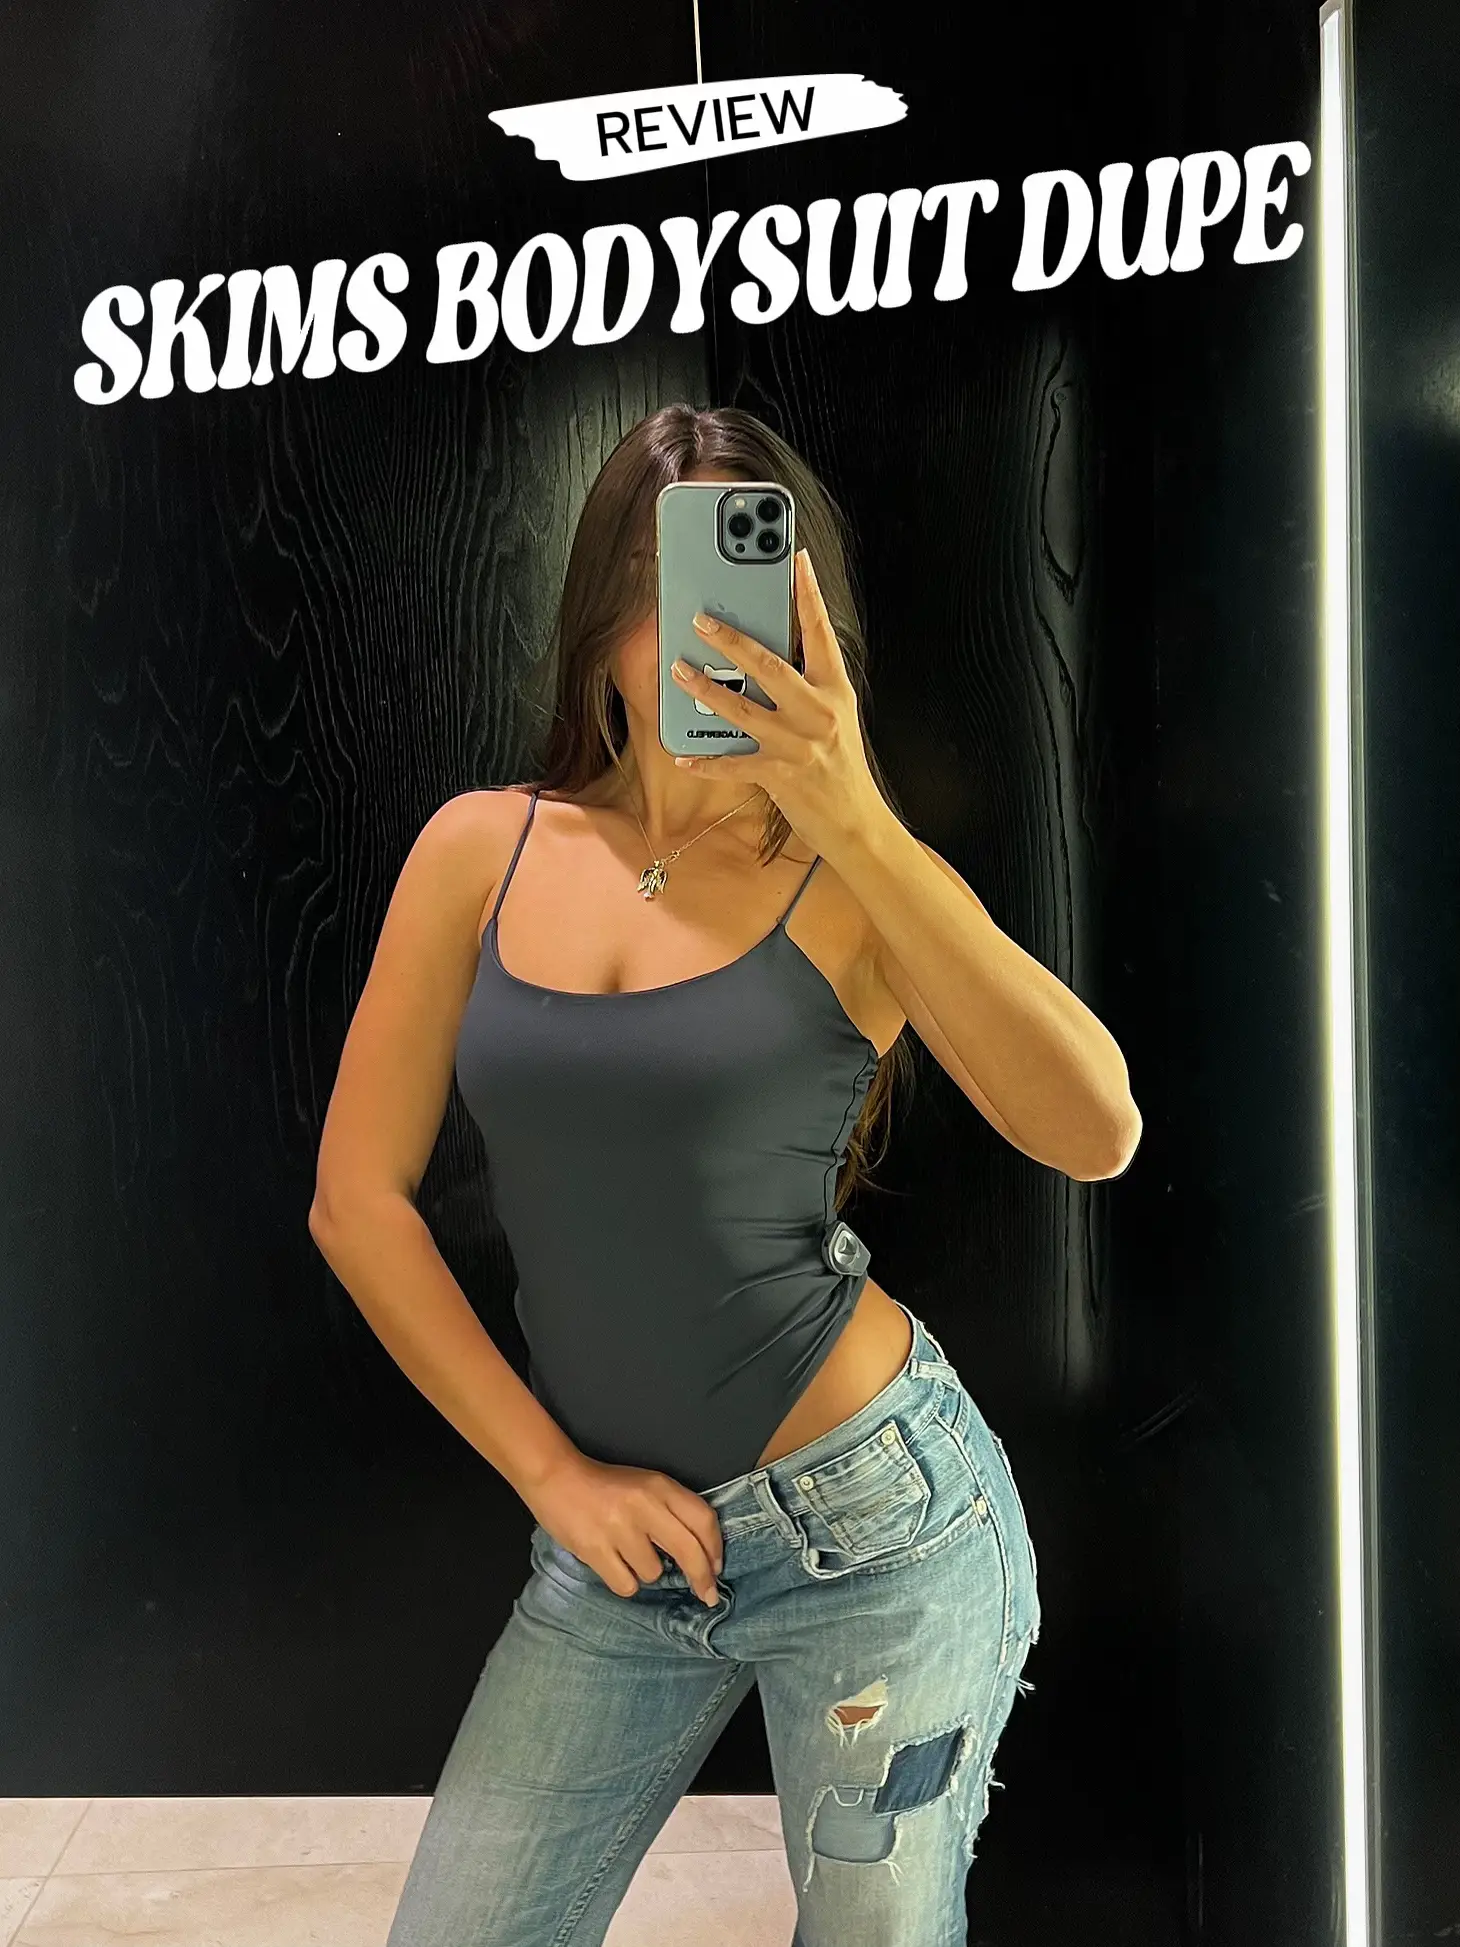 I'm a curvy fashion fan & tried on the viral Skims bodysuit - I wasn't  prepared for how snatched it makes me look